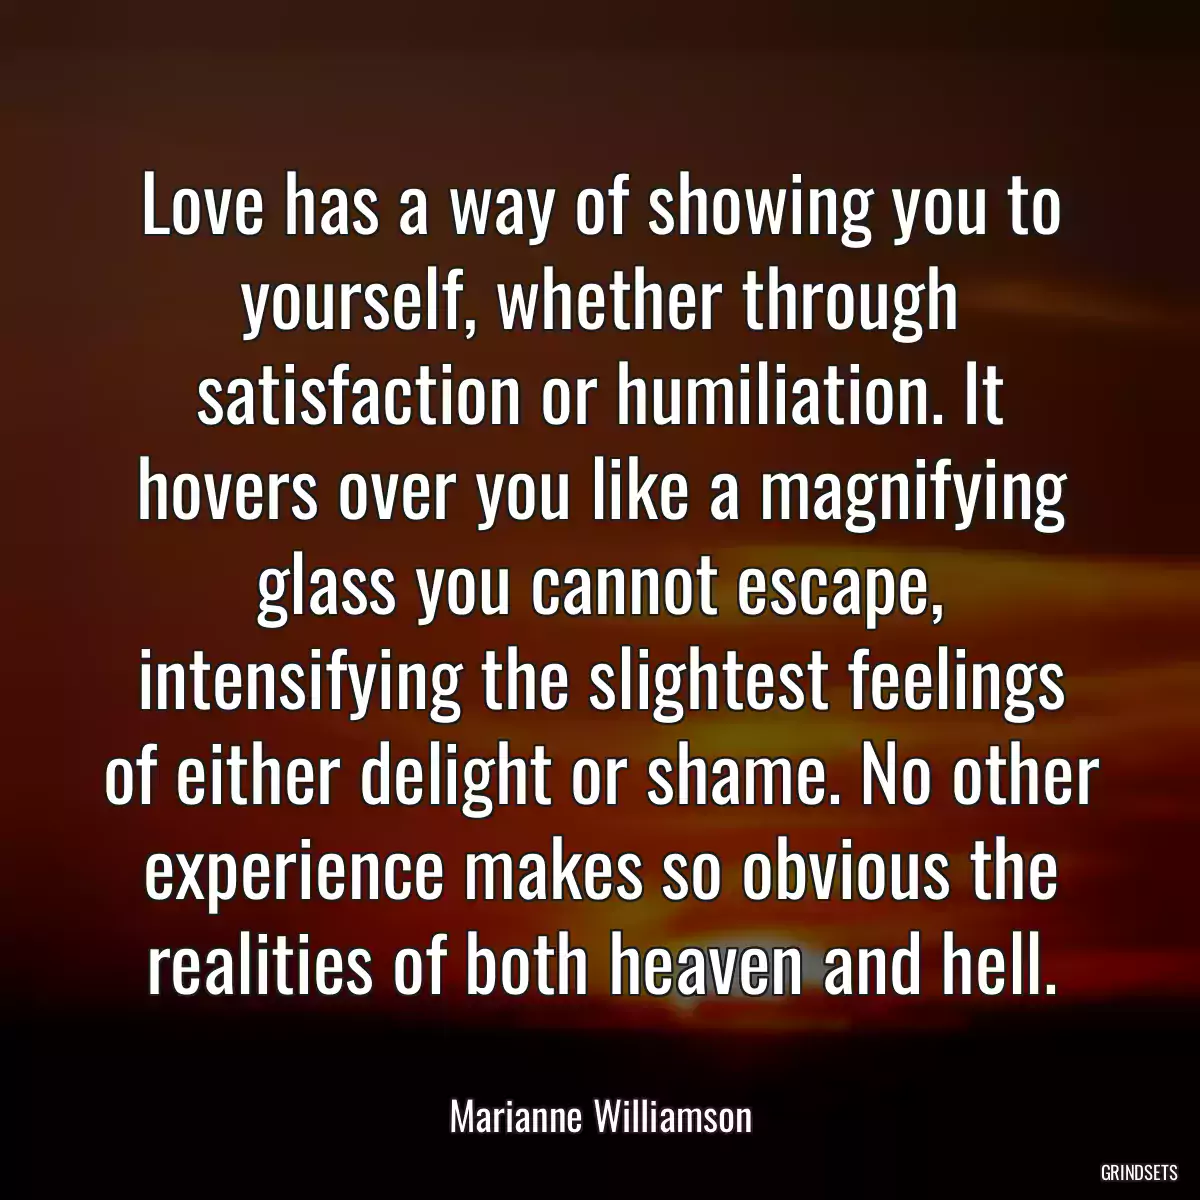 Love has a way of showing you to yourself, whether through satisfaction or humiliation. It hovers over you like a magnifying glass you cannot escape, intensifying the slightest feelings of either delight or shame. No other experience makes so obvious the realities of both heaven and hell.